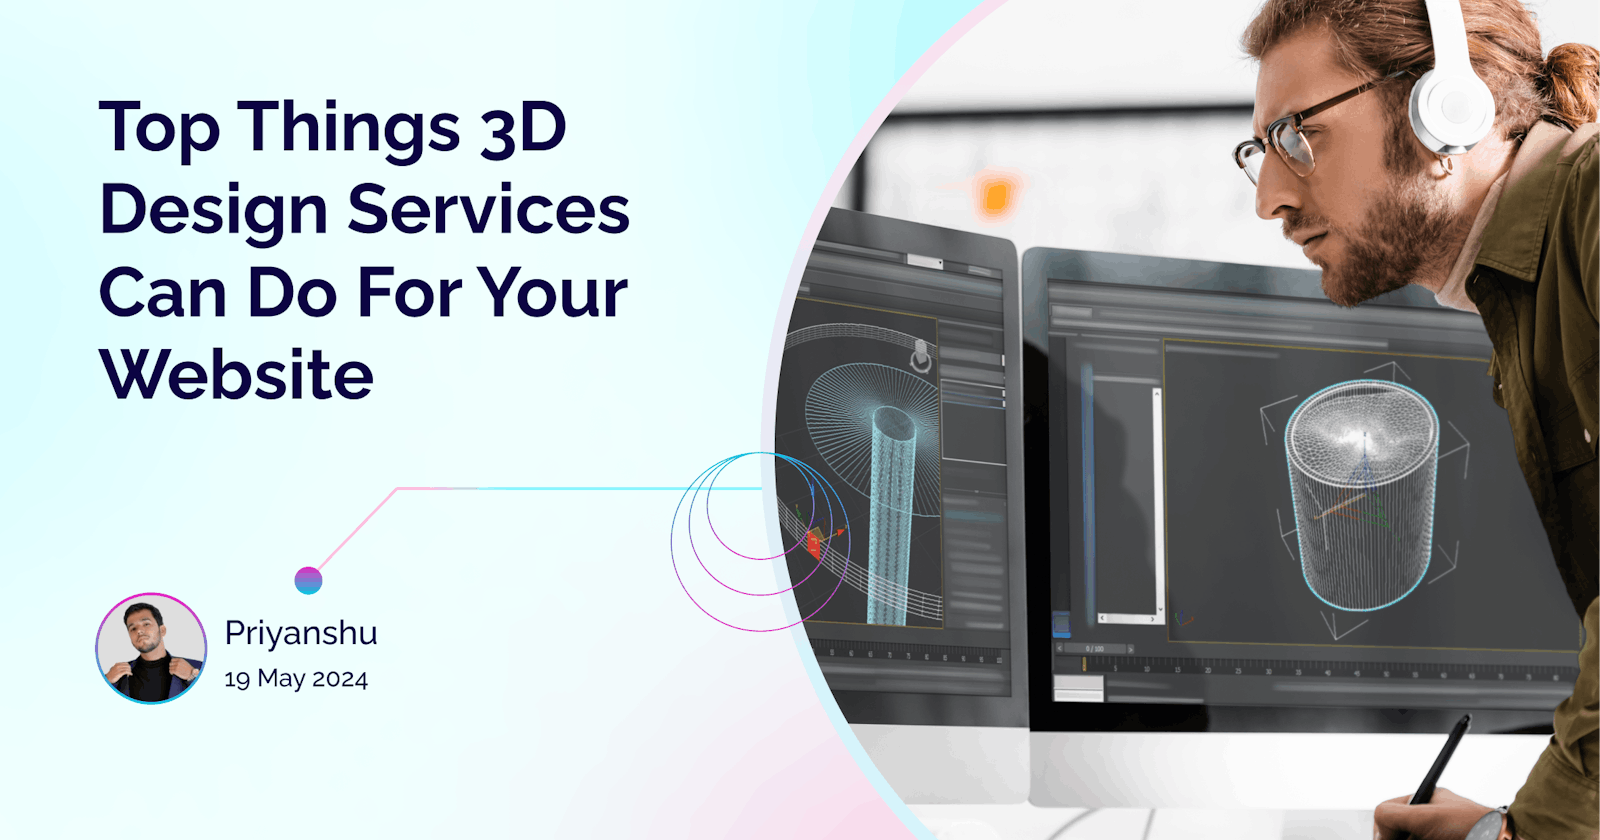 Top Things 3D Design Services Can Do For Your Website